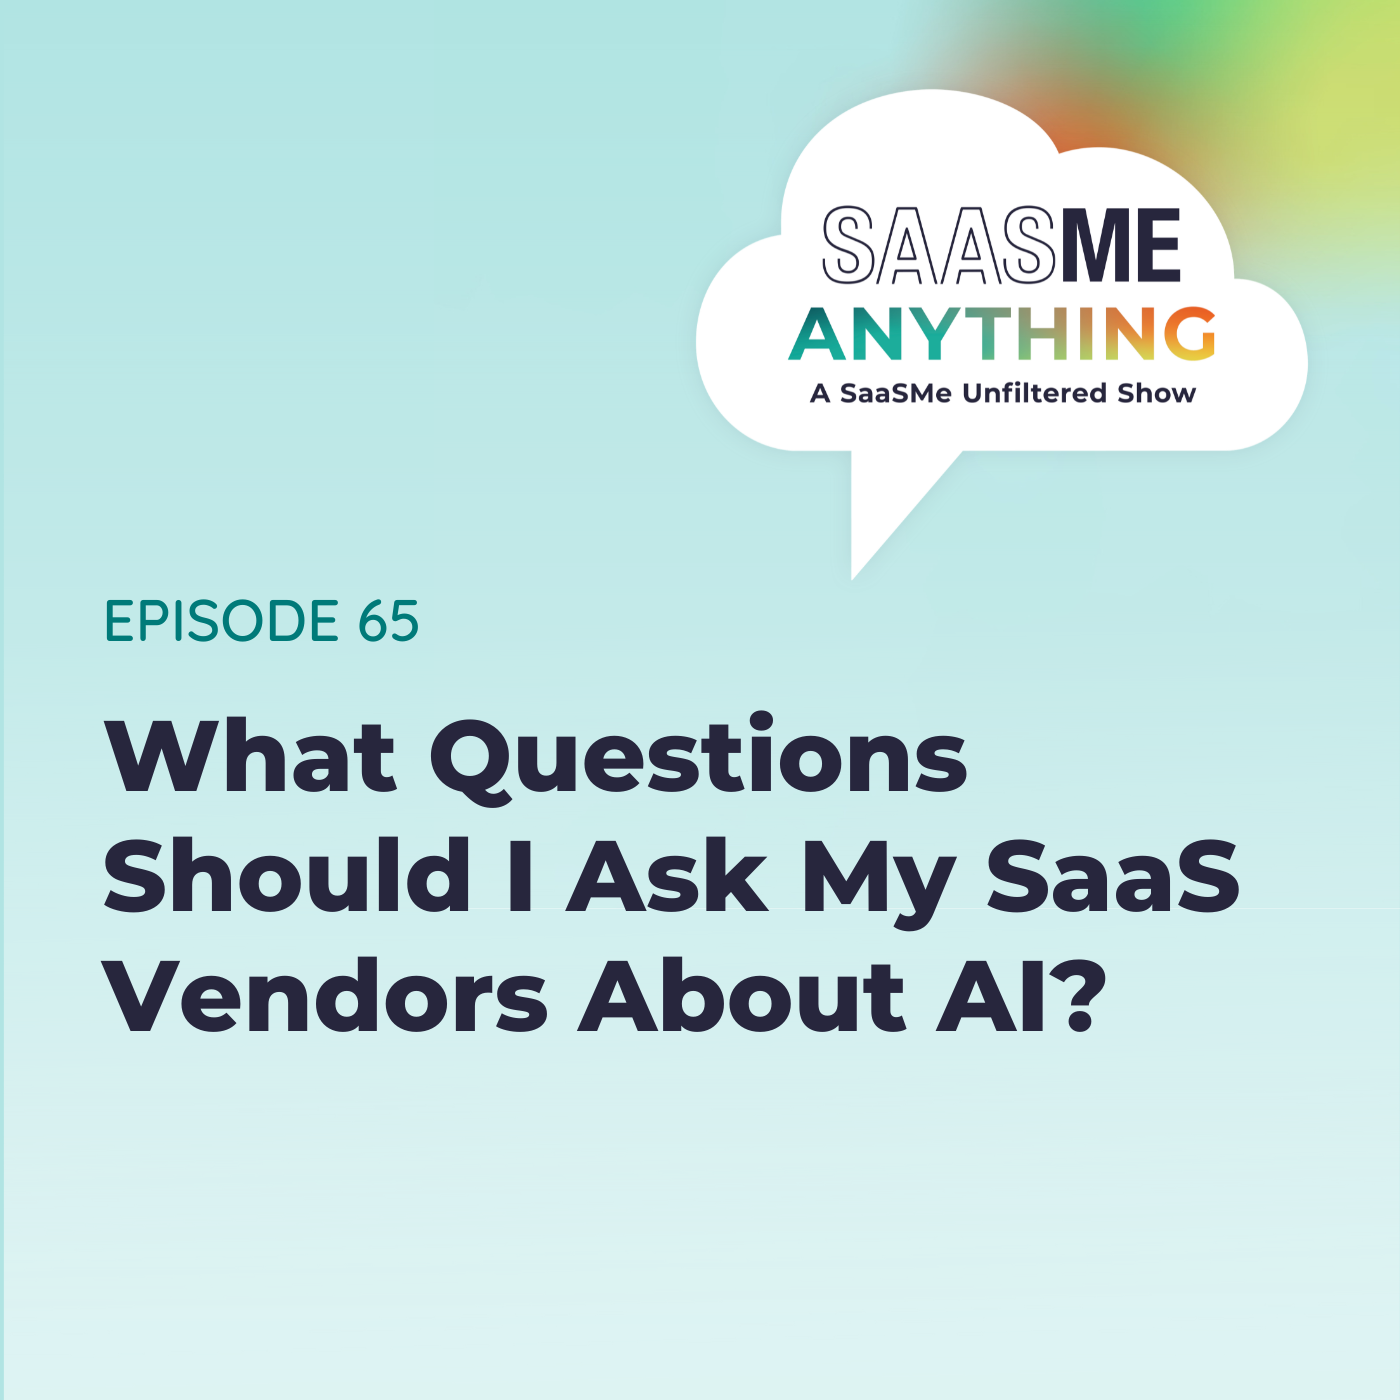 What Questions Should I Ask My SaaS Vendors About AI?